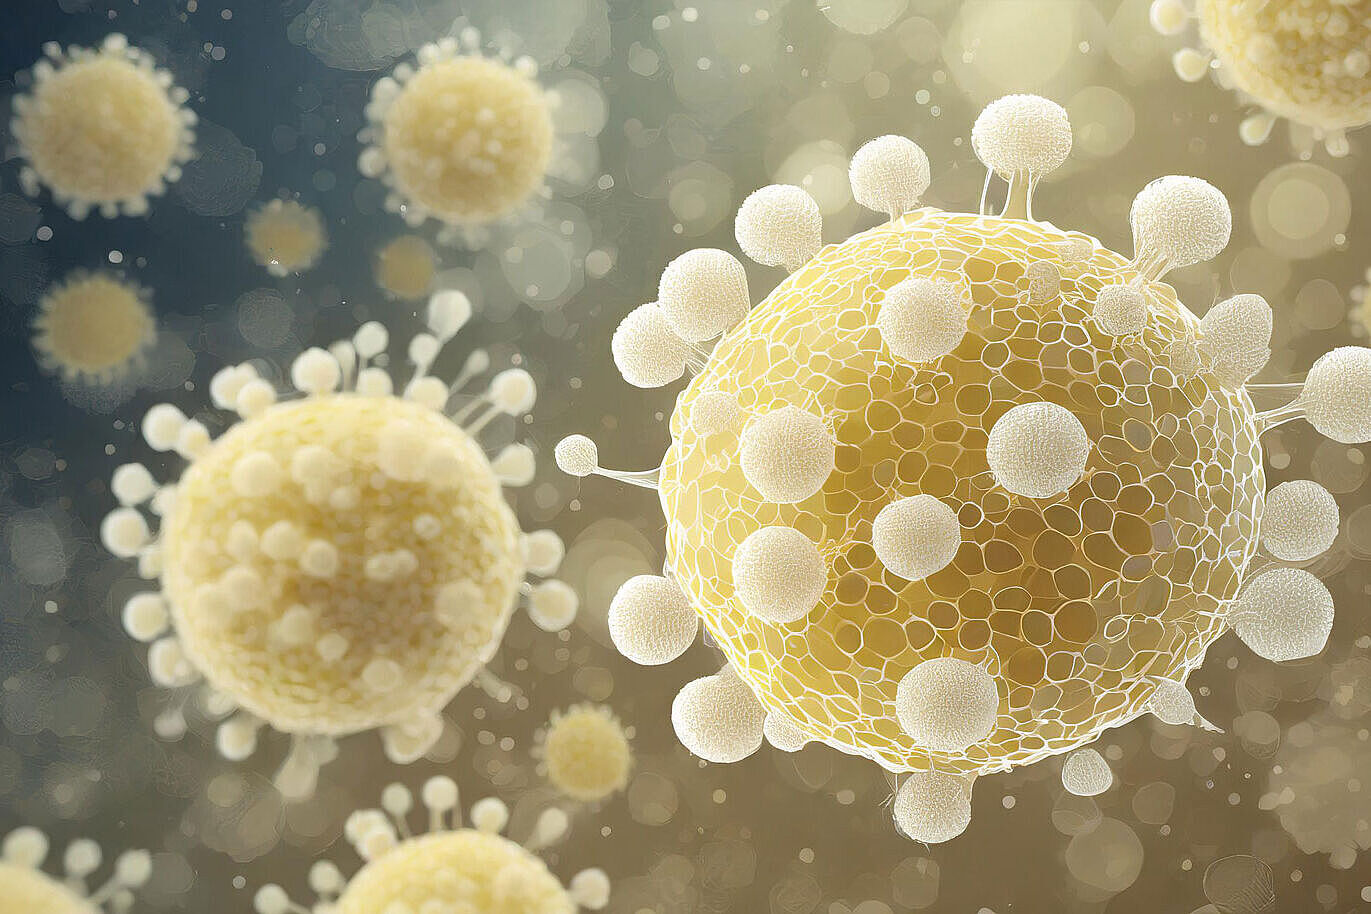 Symbol image of immune cells generated by AI.